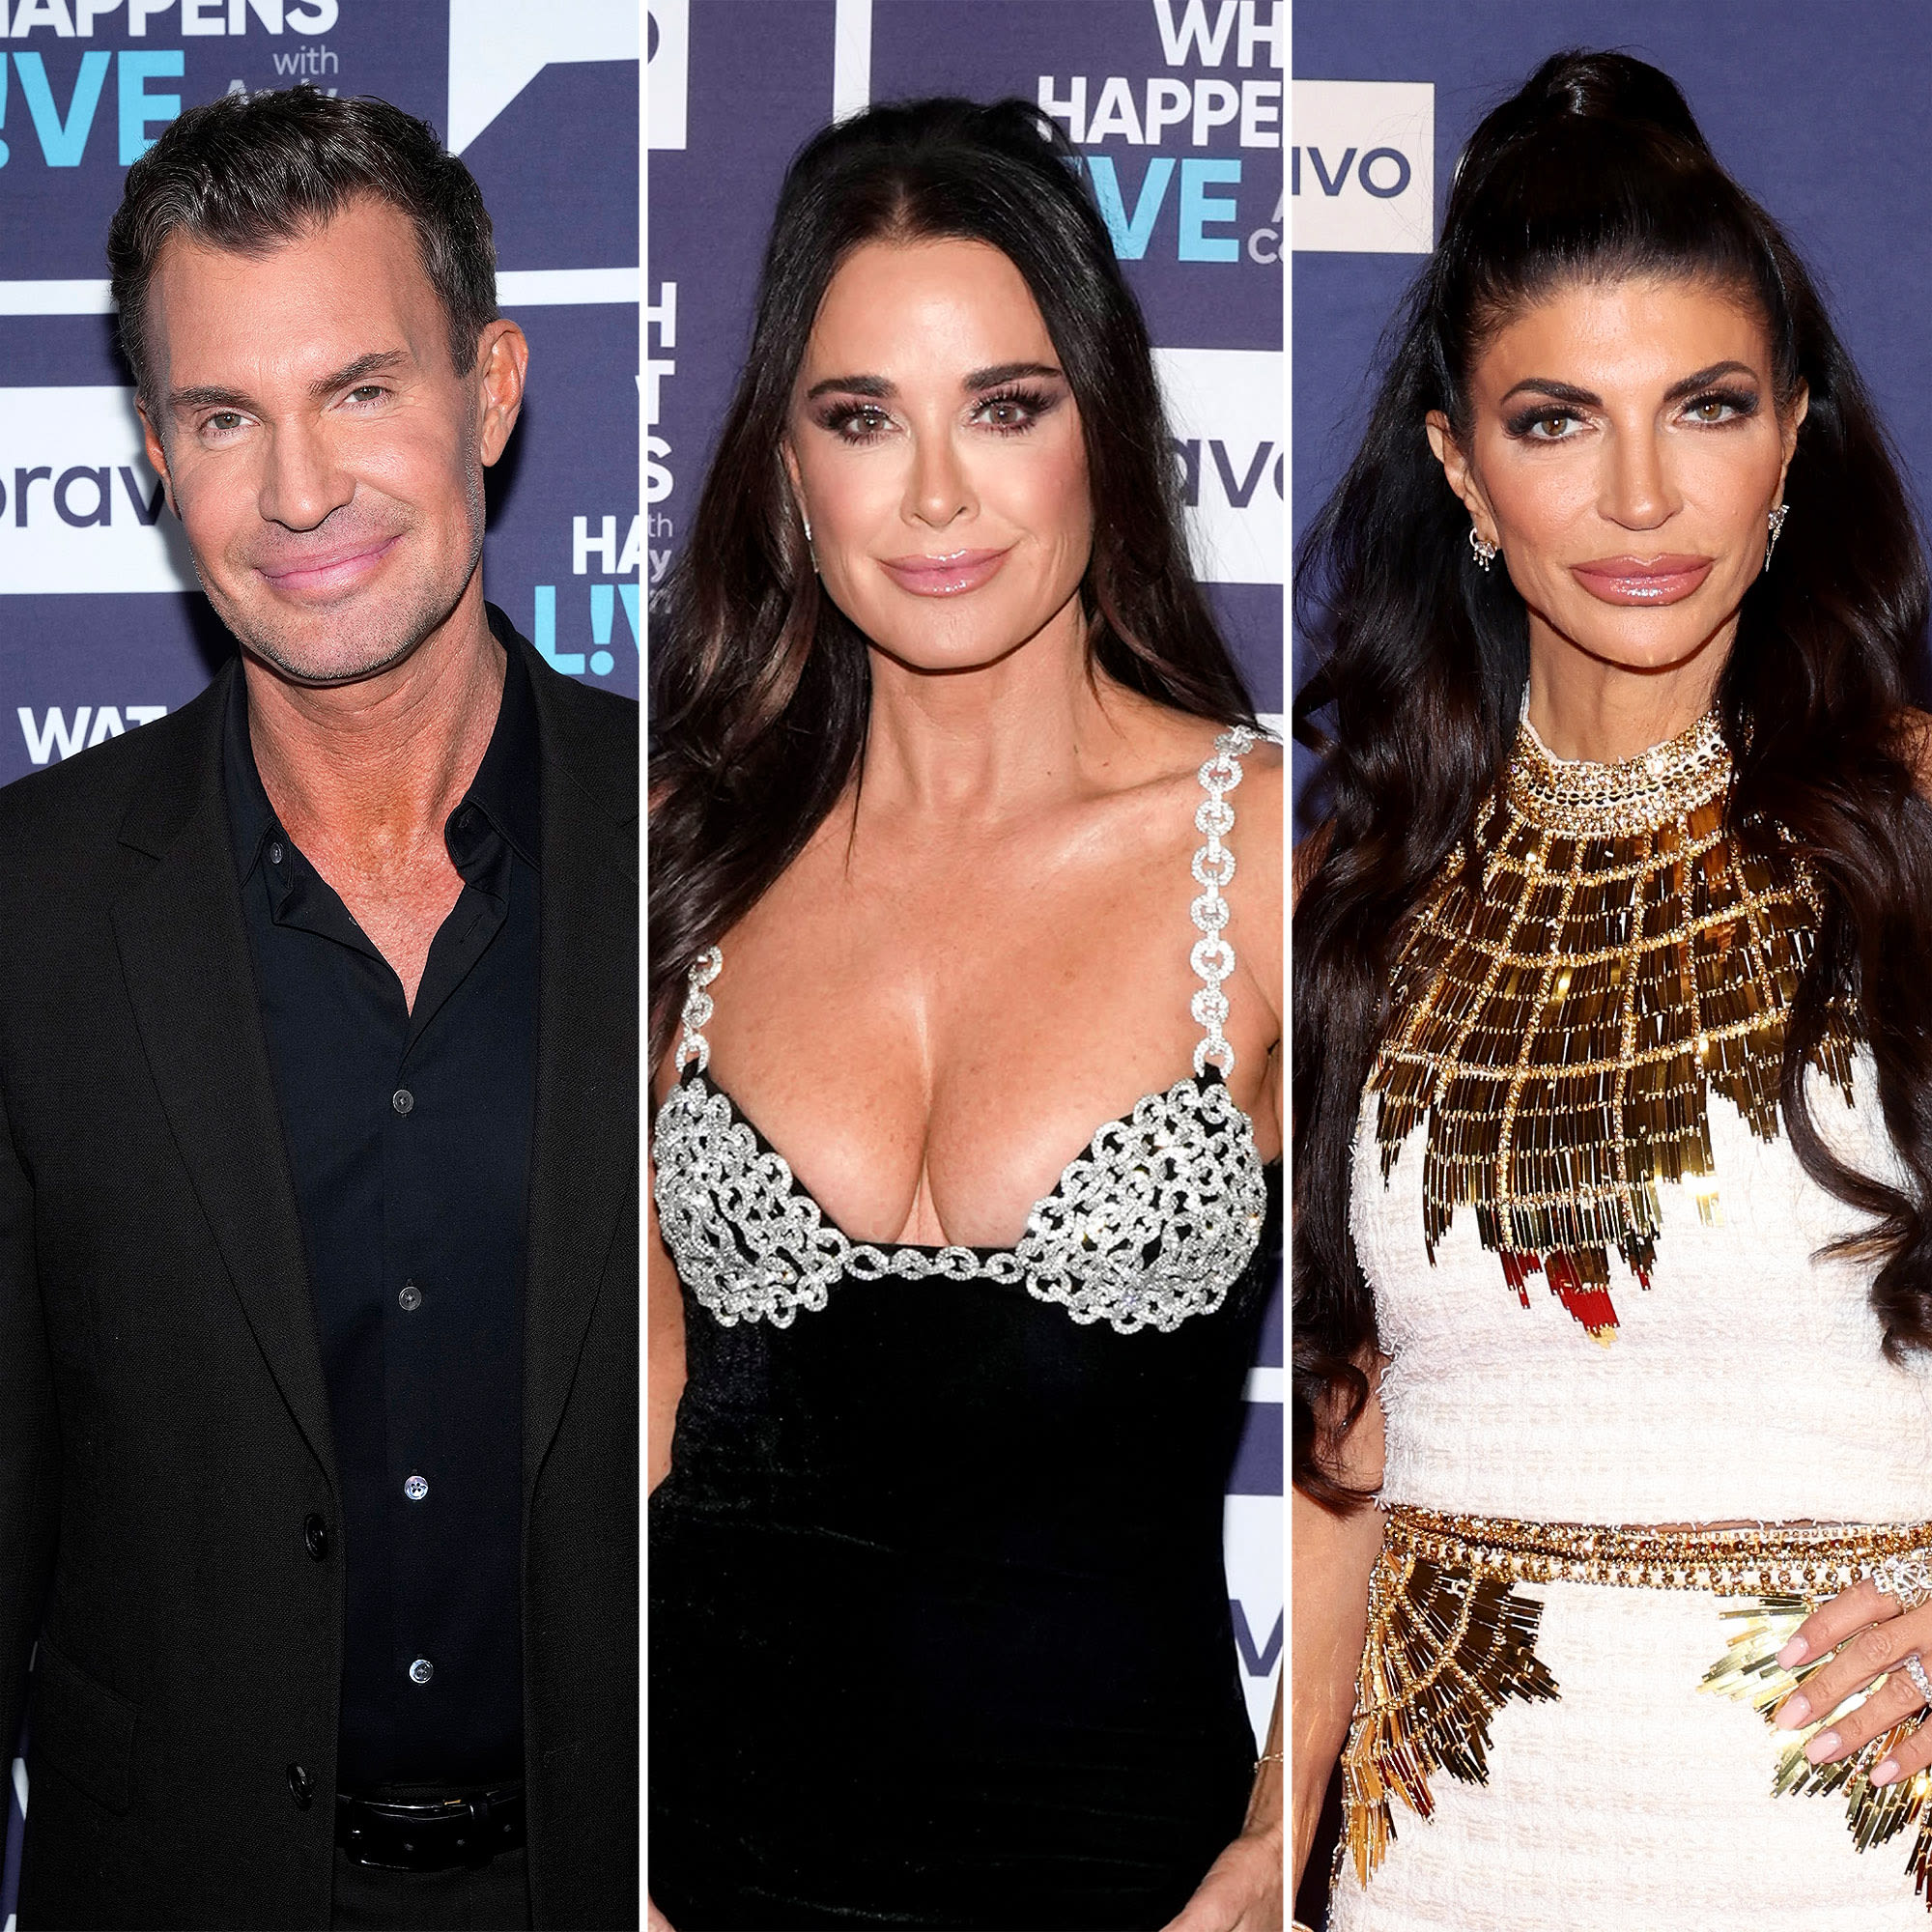 Jeff Lewis’ Wildest Fights With ‘Real Housewives’ Stars: Kyle Richards, Teresa Giudice and More